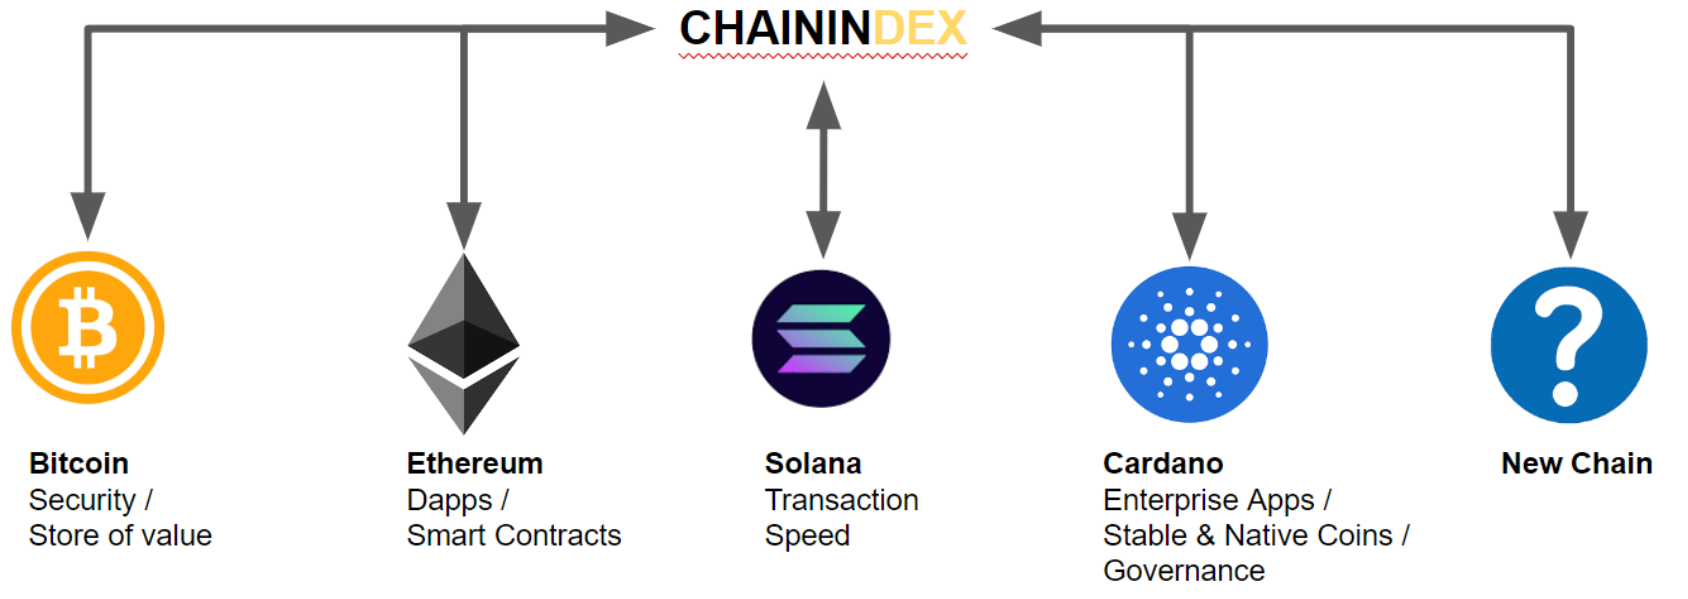 What is ChainIndex